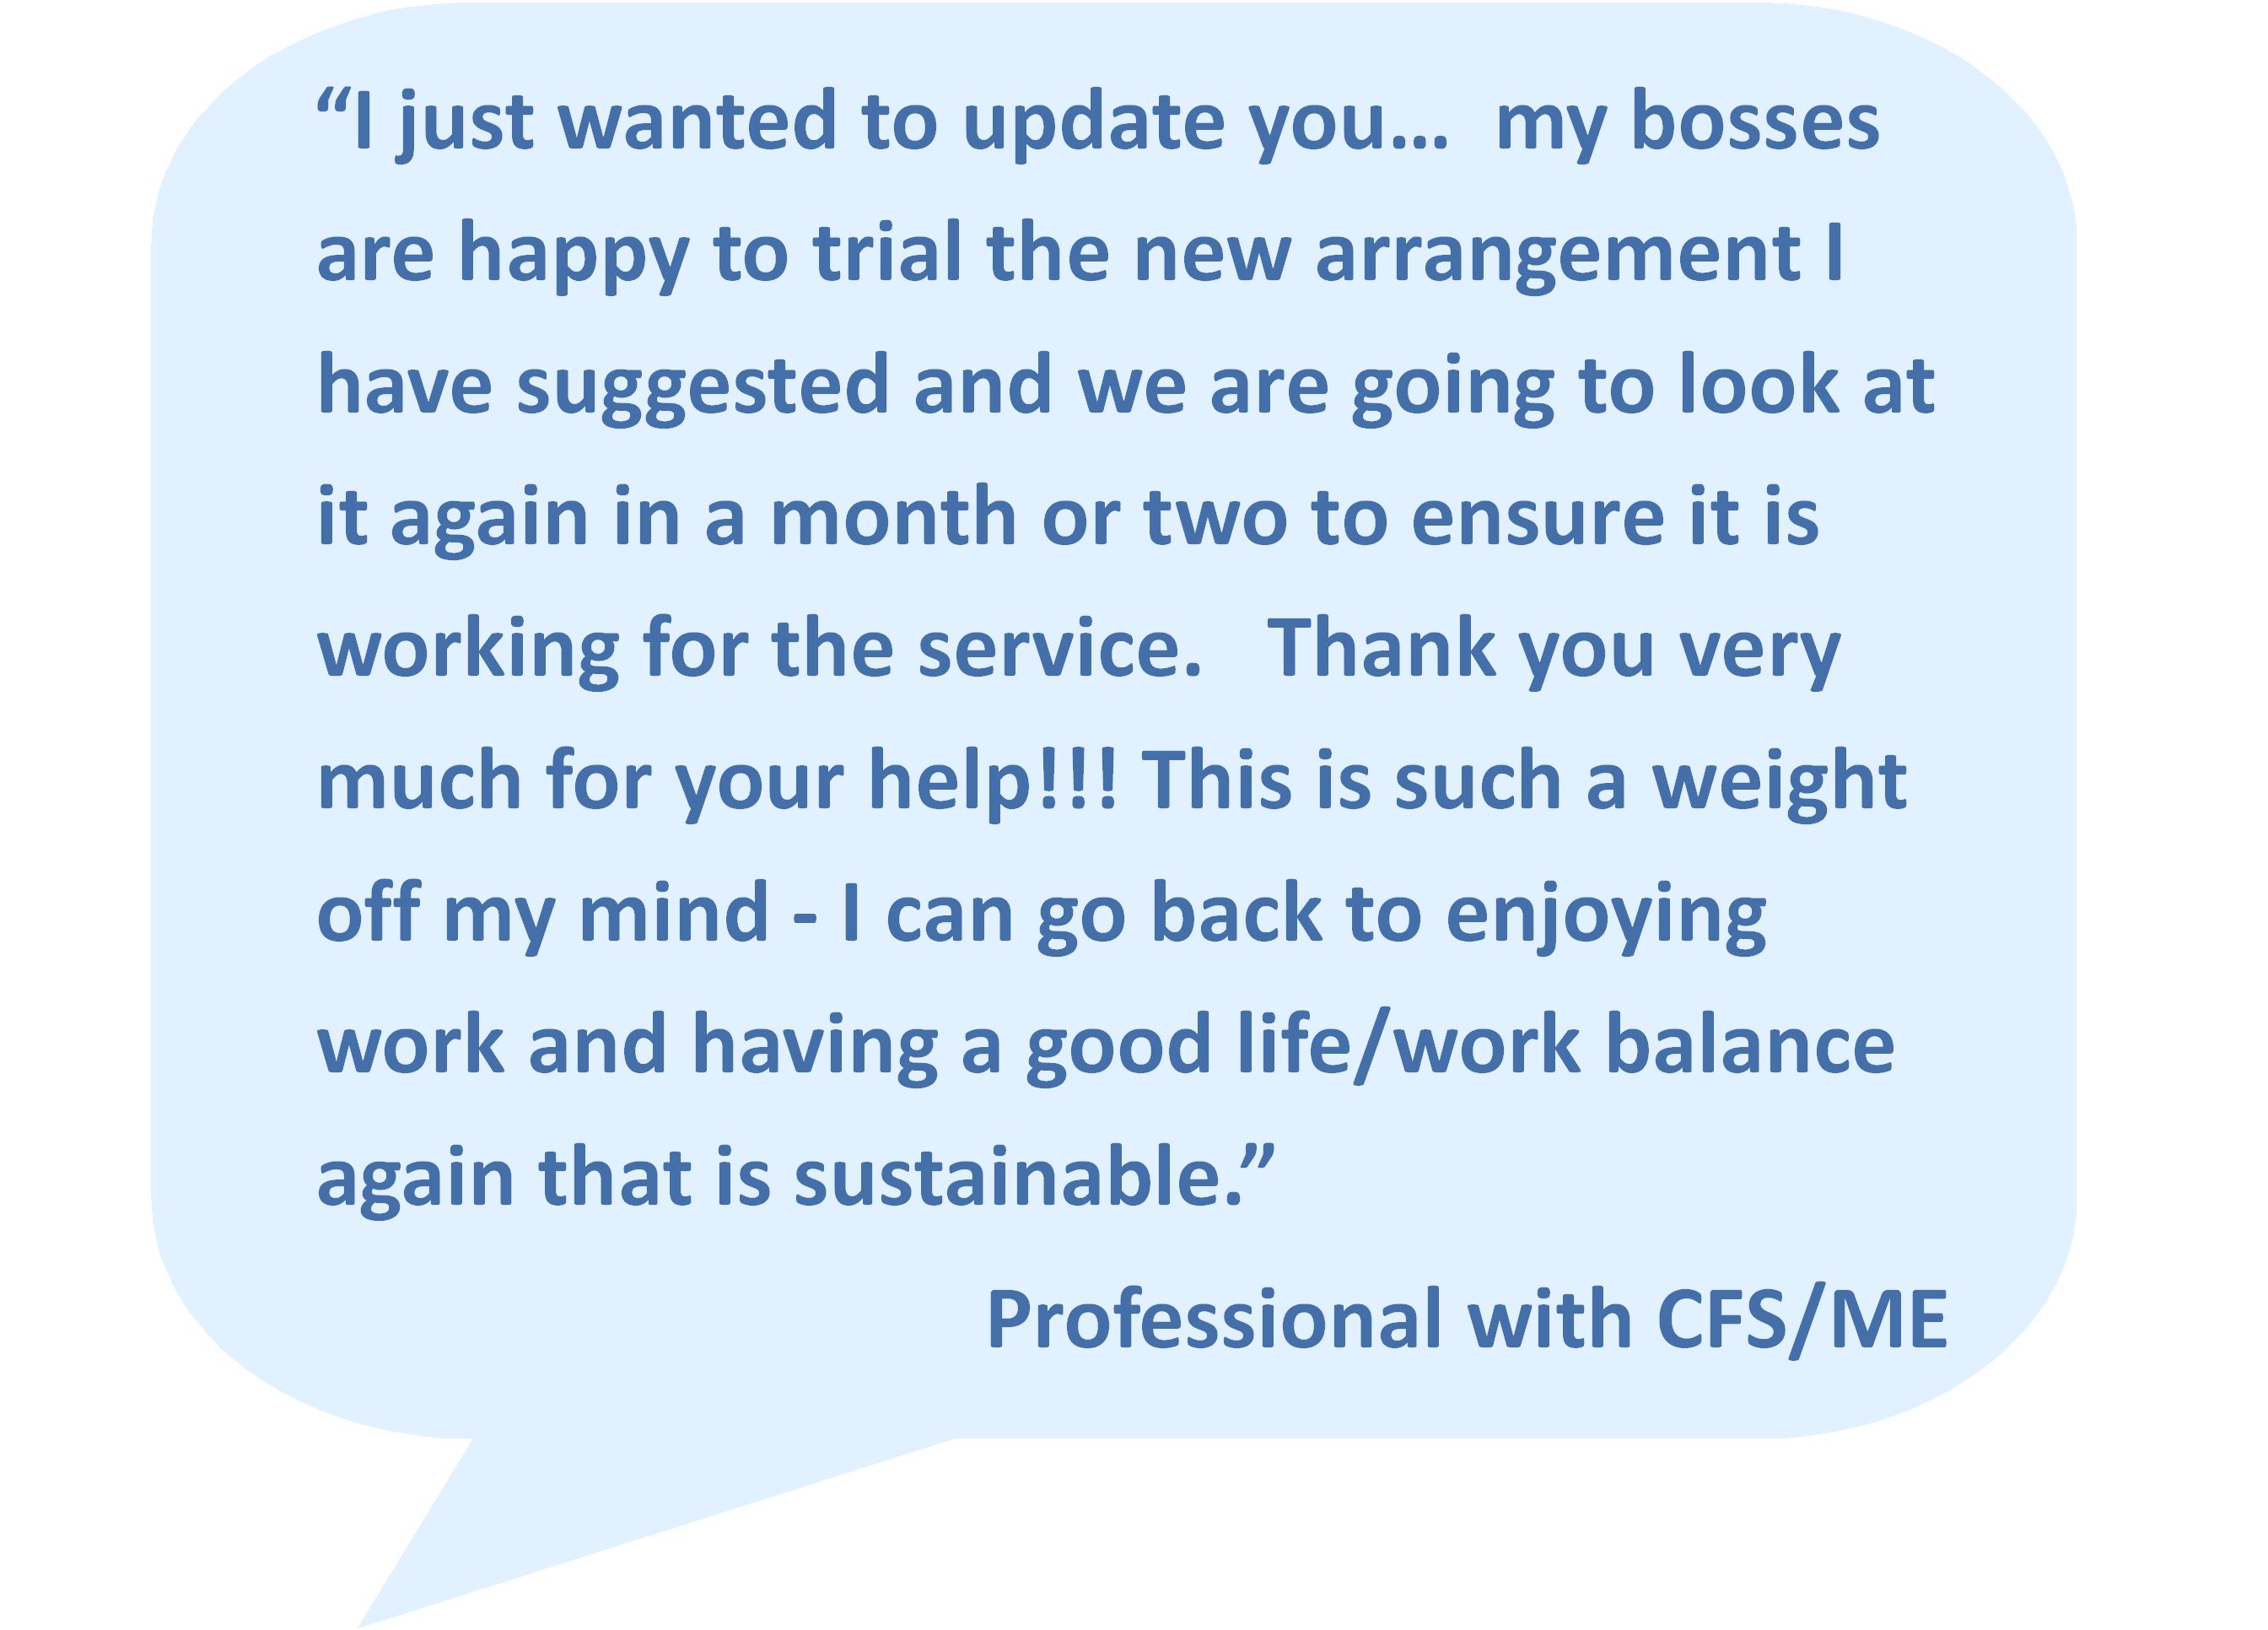 “I just wanted to update you… my bosses are happy to trial the new arrangement I have suggested and we are going to look at it again in a month or two to ensure it is working for the service. Thank you very much for your help!!! This is such a weight off my mind - I can go back to enjoying work and having a good life/work balance again that is sustainable.”  Professional with CFS/ME